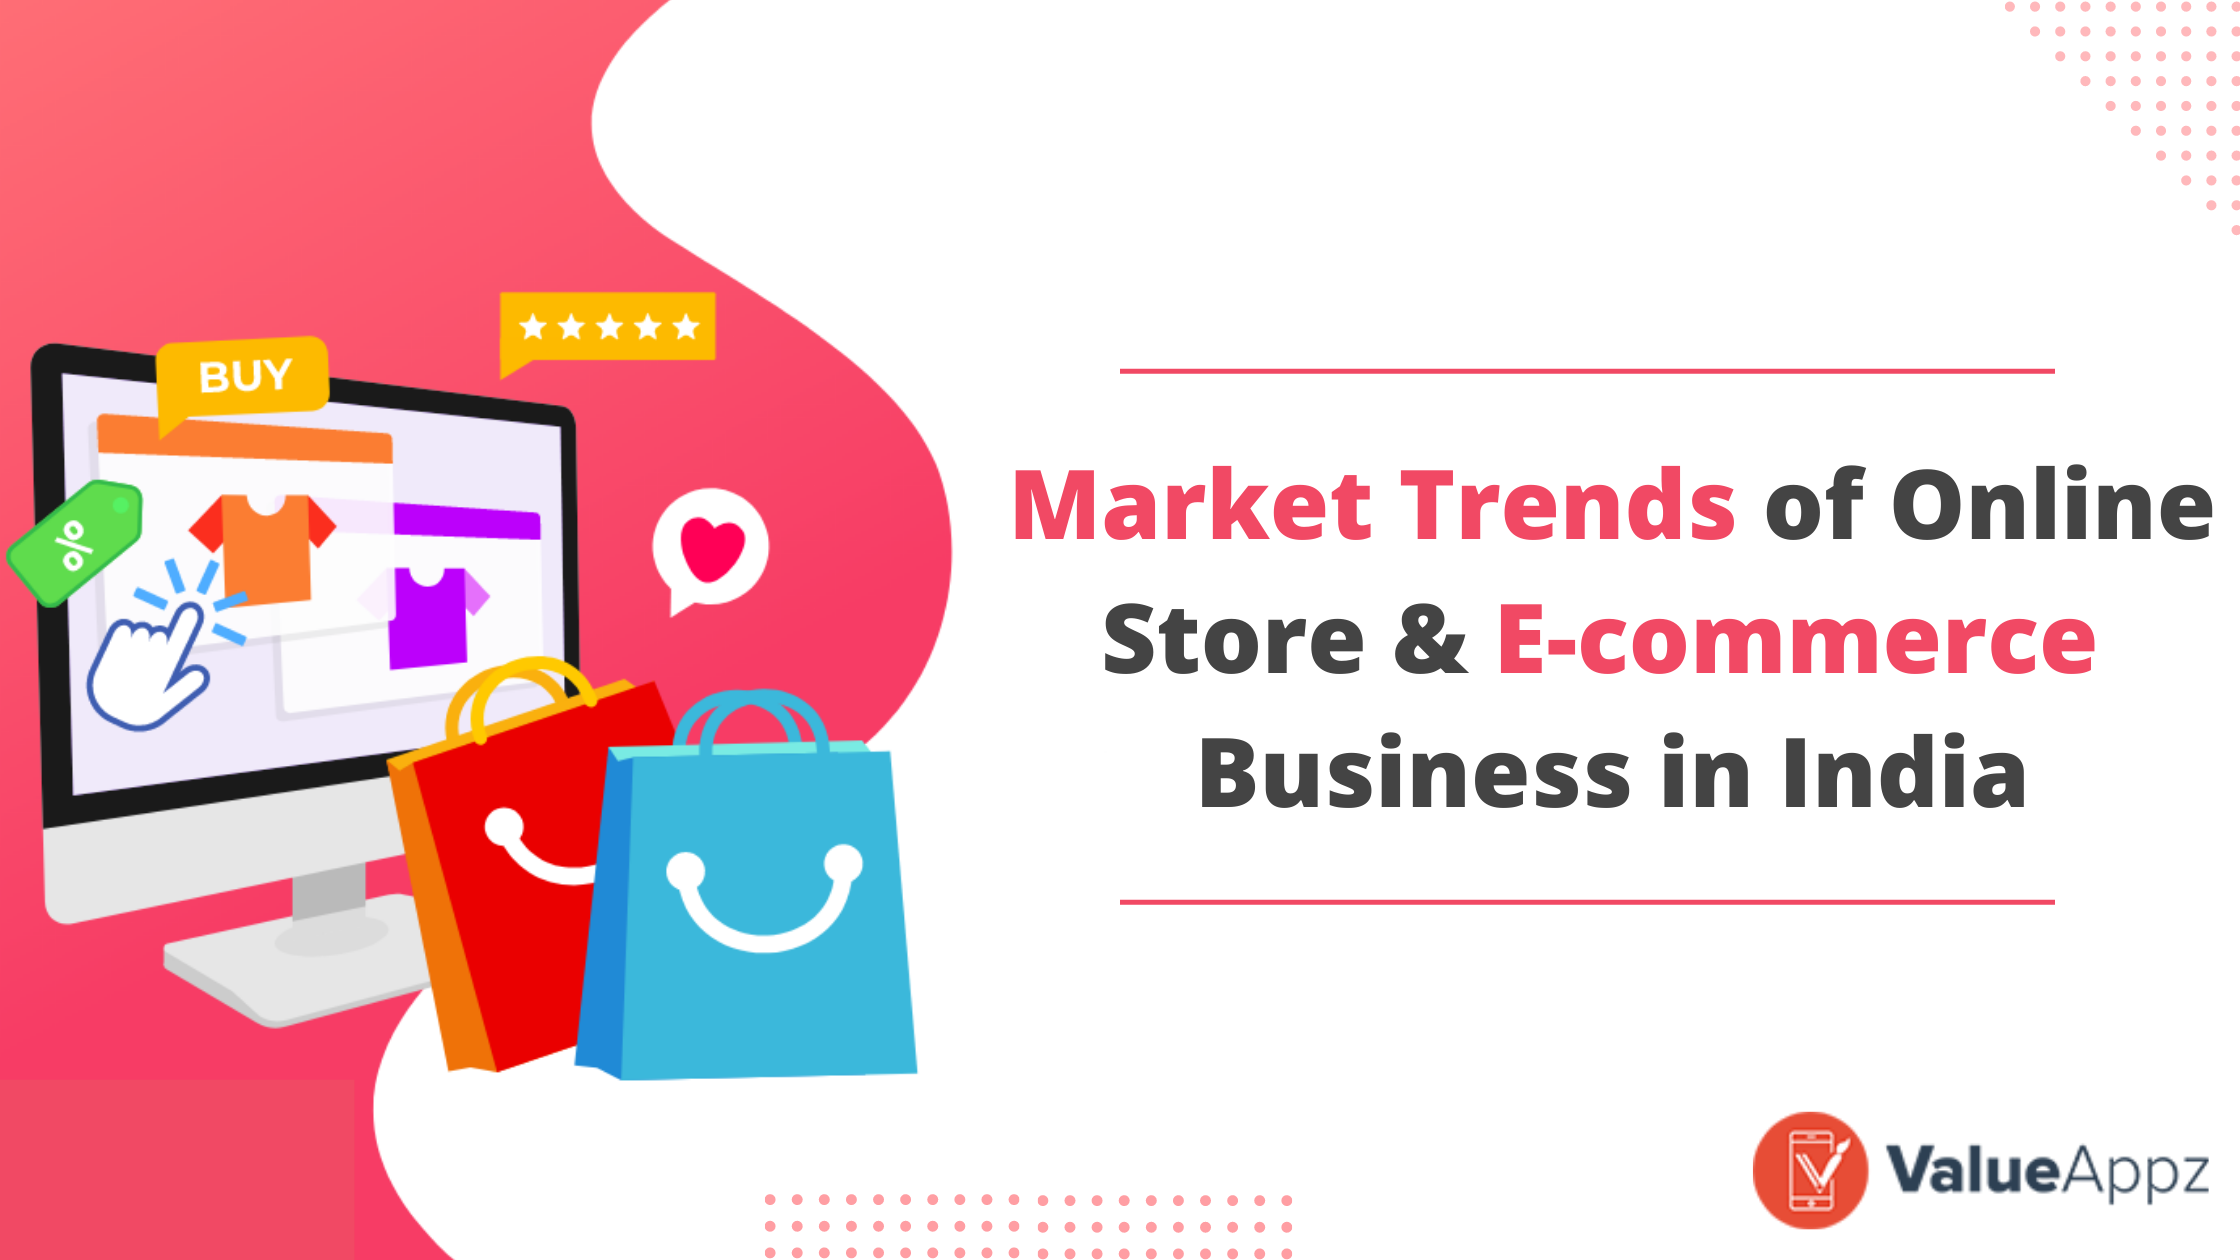 Market Trends of Online Store & E-commerce Business in India